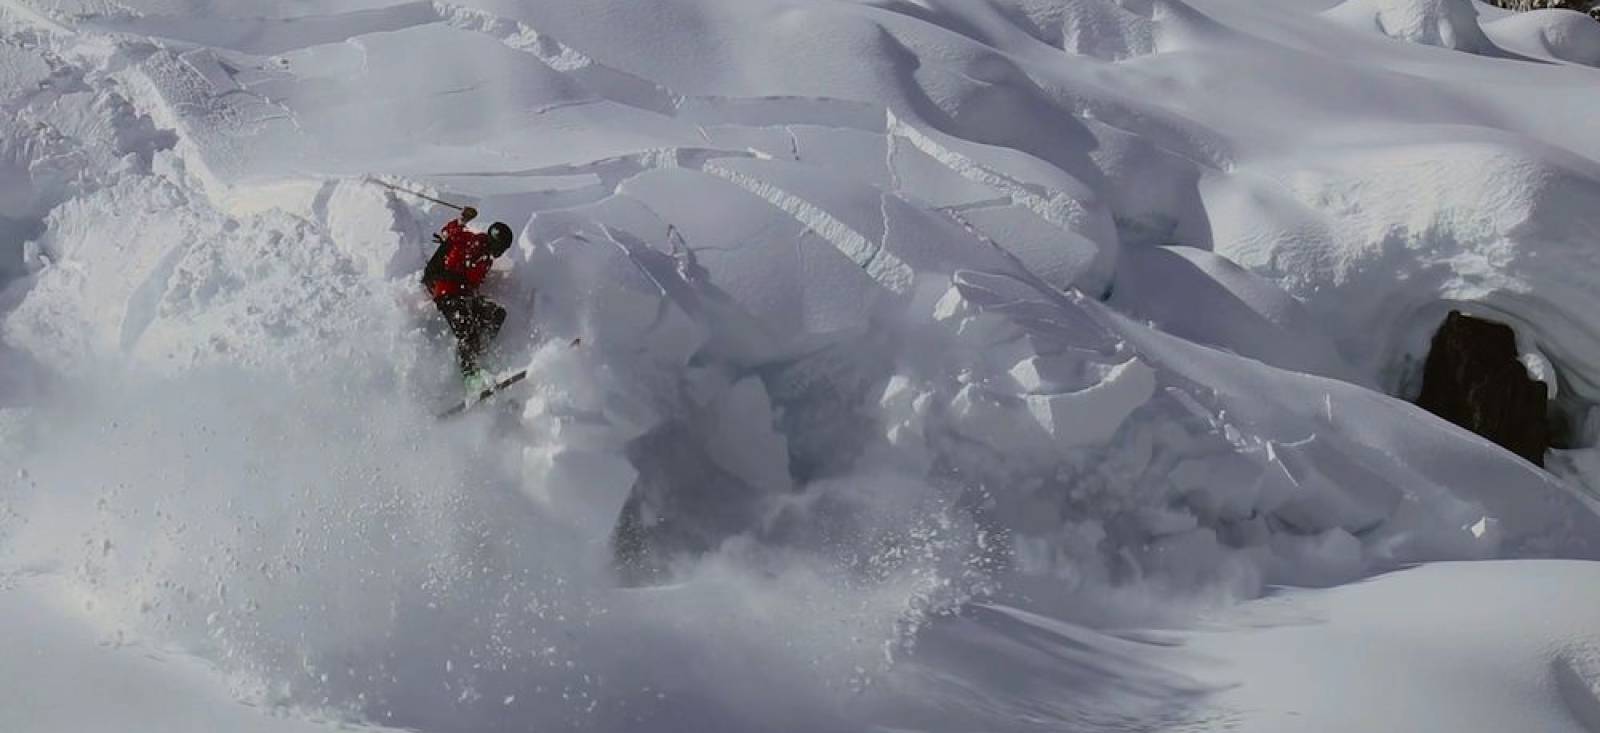 THE SCIENCE OF AVALANCHES